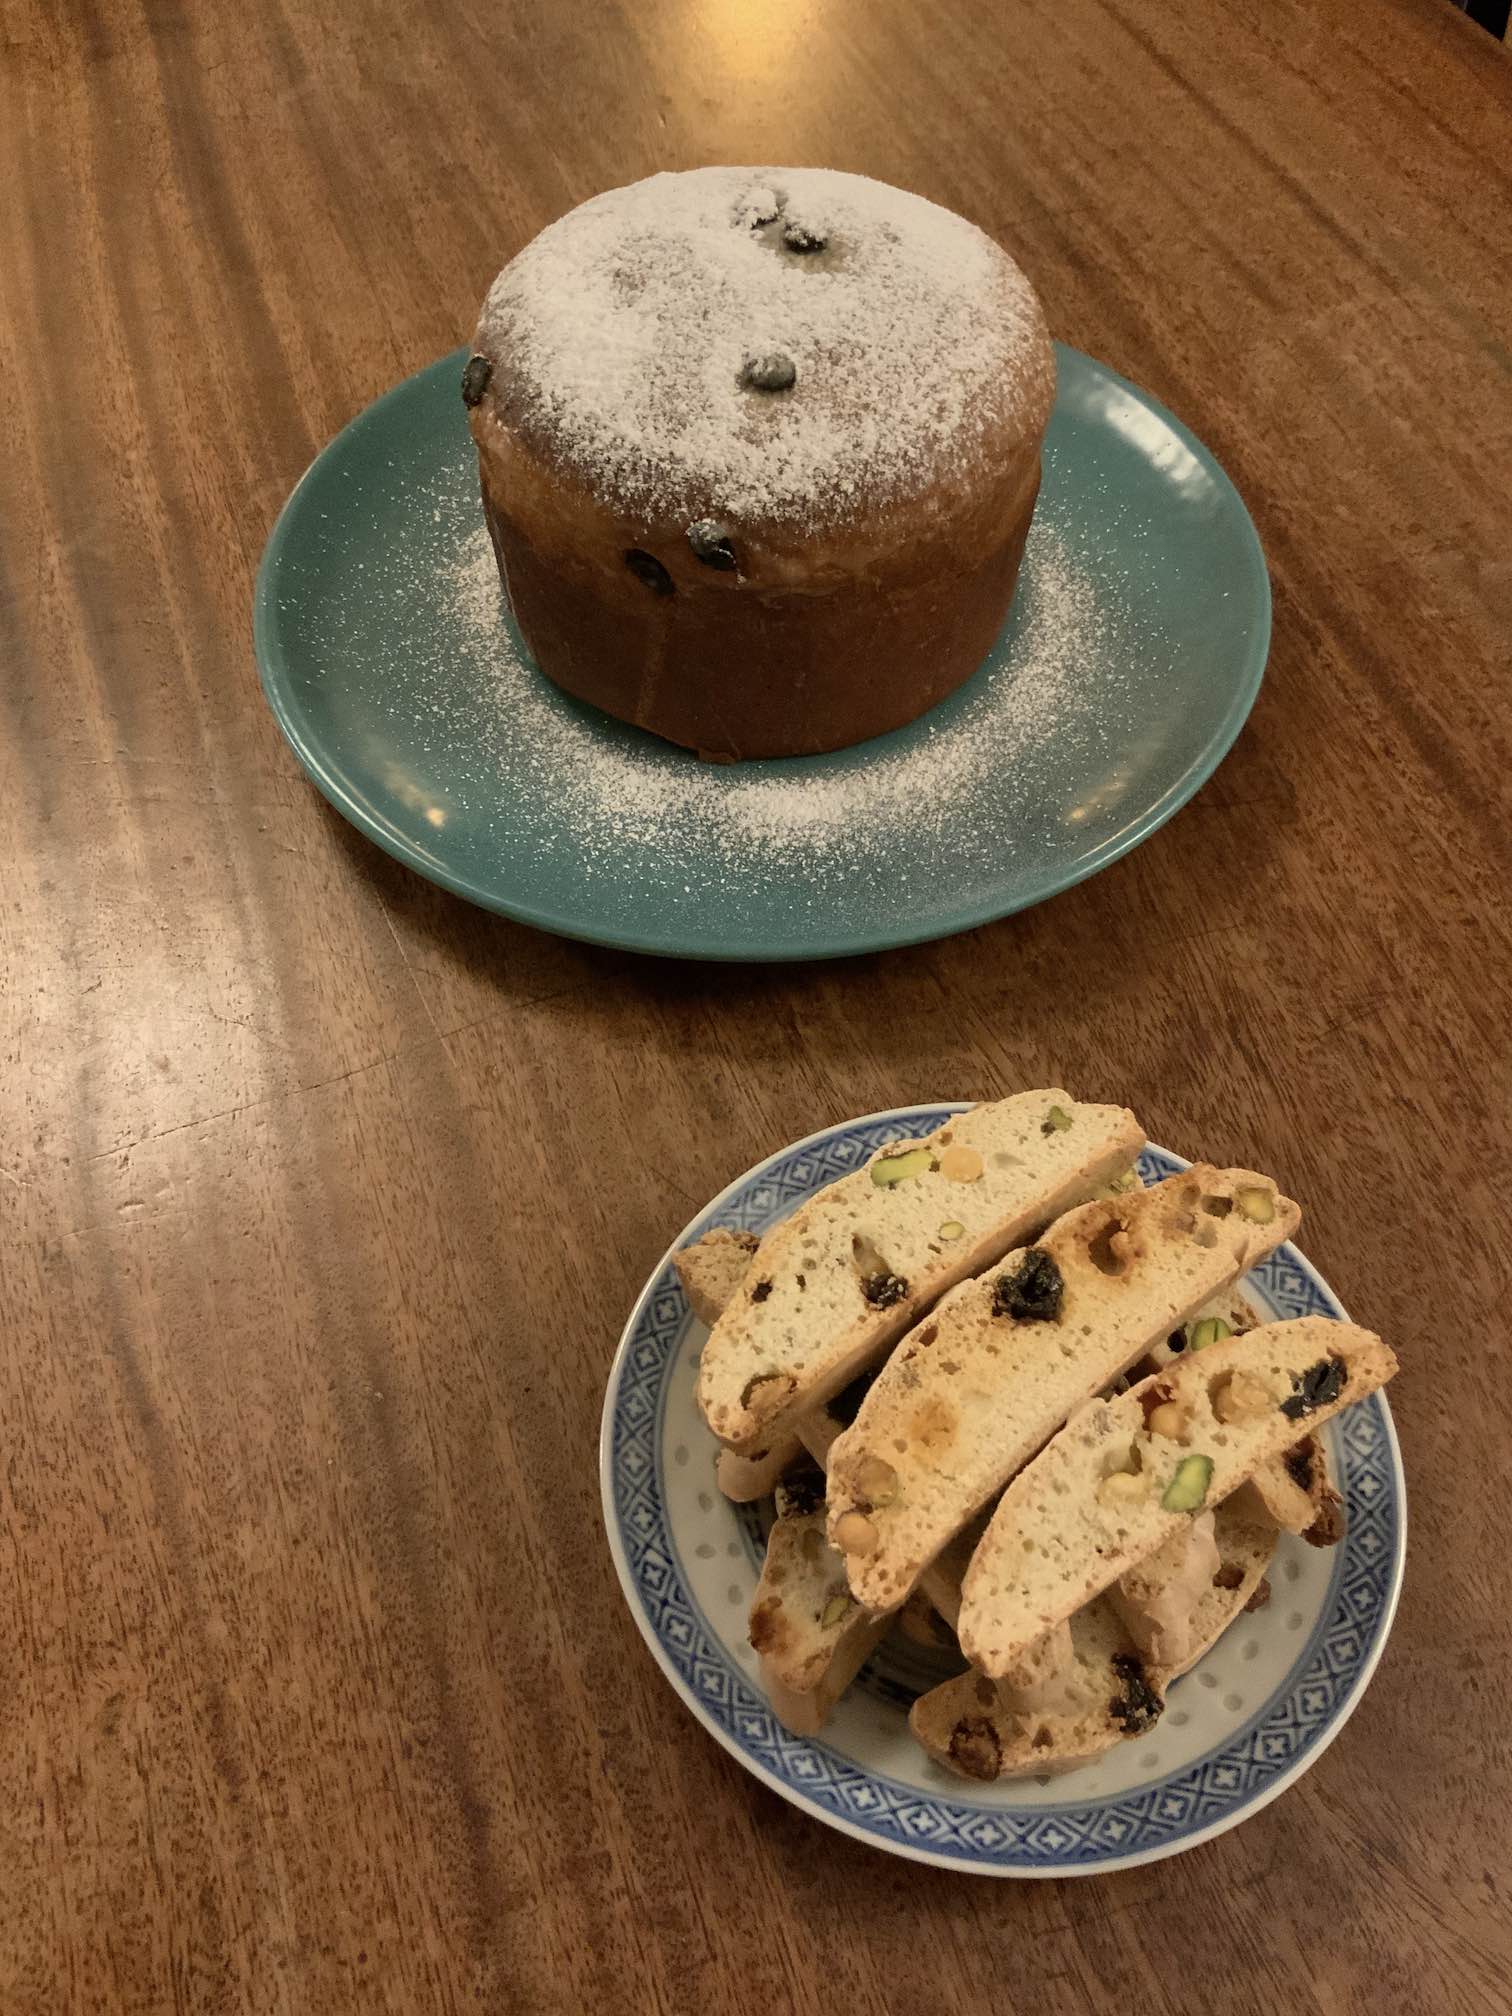 Photo of crunchy little fruit and nut filled bread slices, and a tall round bread/cake dusted with icing sugar.